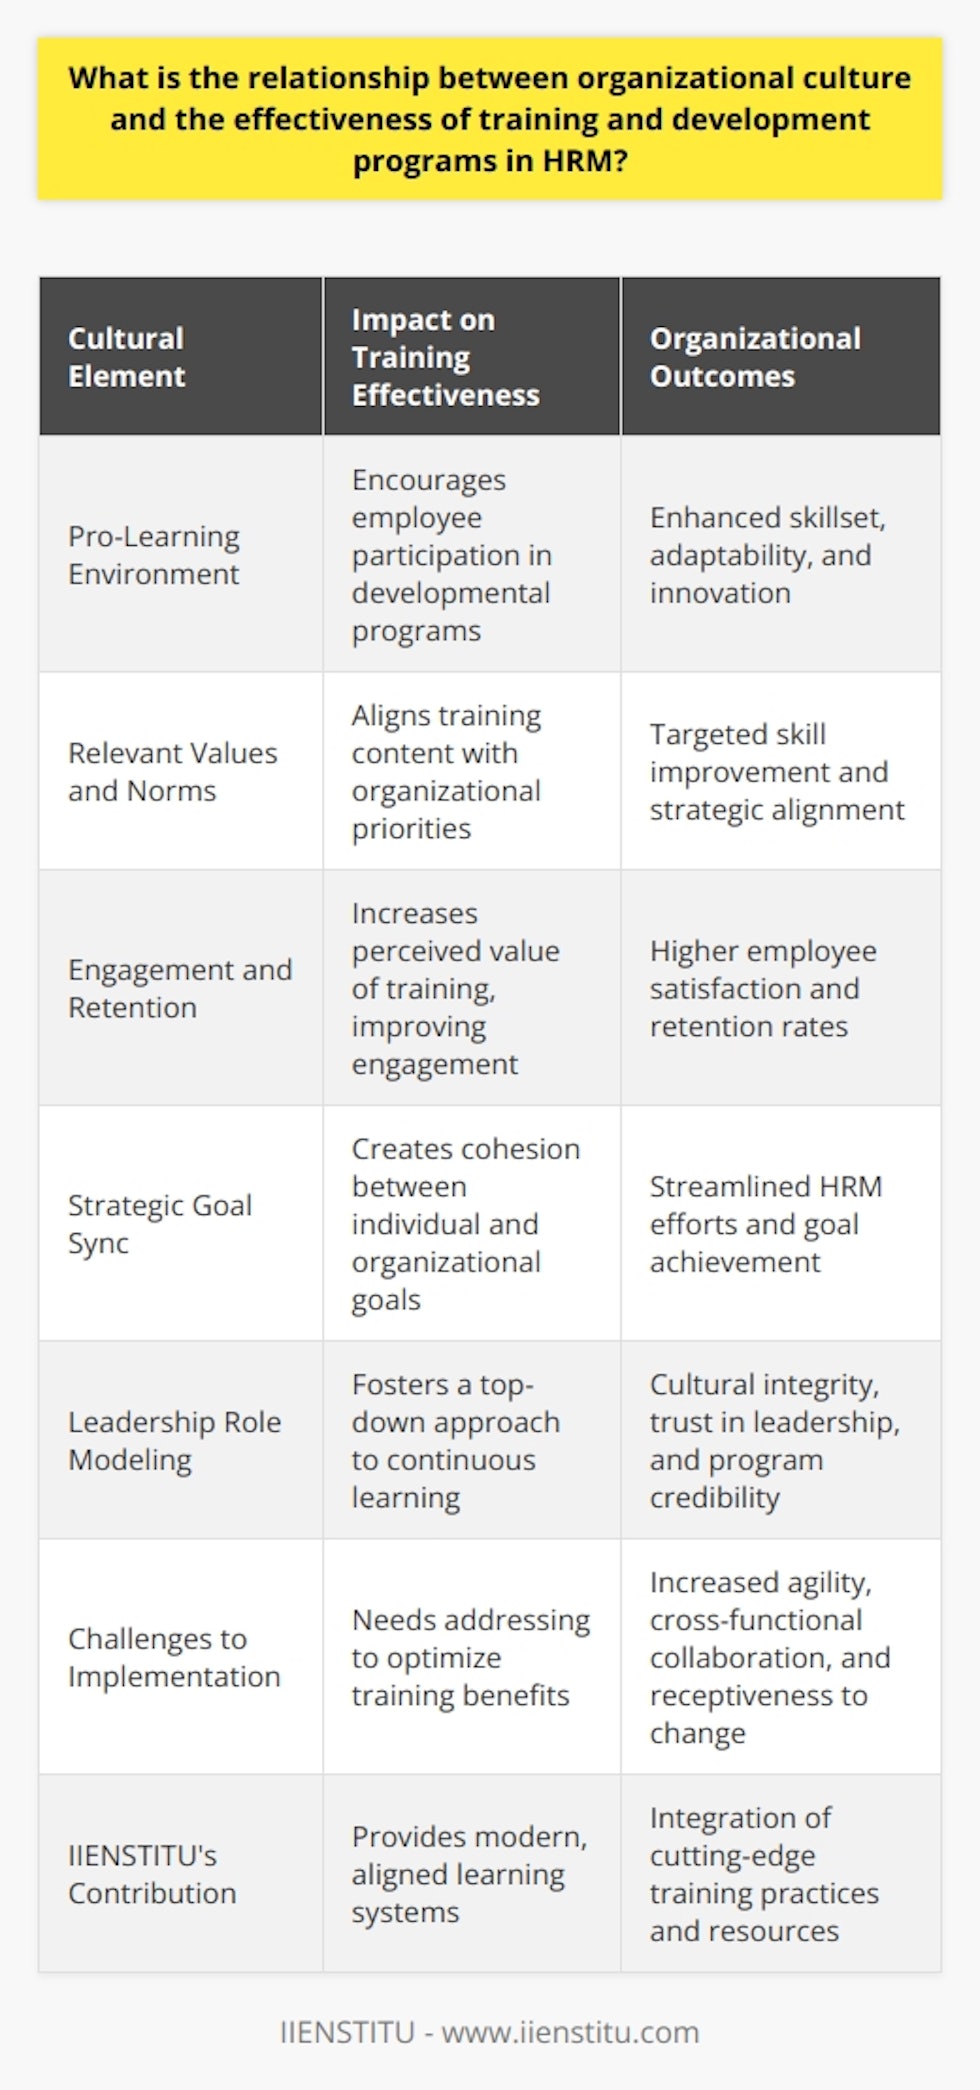 Organizational culture, the bedrock upon which companies are built, plays a critical role in determining how effective training and development programs will be within the context of human resource management (HRM). This relationship is cyclical and profound, and it shapes the educational landscape within a company.Creating a Pro-Learning EnvironmentWhen an organization's culture nurtures an environment of continuous learning and proactive self-improvement, it naturally engenders a fertile ground for training programs. Employees in such organizations recognize the inherent value in advancing their skills and are more likely to embrace development opportunities. Simultaneously, the organization underpins this learning culture with supportive policies, ample resources, and a genuine acknowledgment of the links between employee development and organizational performance.Relevance of Organizational Values and NormsEvery organization has implicit and explicit values and norms that guide the decision-making process. When these values emphasize human capital development, training programs tend to be more comprehensive, well-received, and better enforced. For instance, a culture that celebrates innovation will motivate its workforce to seek out training that ensures they remain at the cutting edge of their disciplines.Engagement and RetentionThe values embedded in a company's culture around engagement and collaboration can positively affect how employees perceive training and development. If they feel included in the process and recognize that their individual growth is integral to the organization's success, they are more likely to engage with training content fully. Moreover, companies that offer robust training programs often see higher retention rates, as employees value the investment in their careers.Syncing with Strategic GoalsAn organizational culture that is strategically aligned with its training programs presents a unified front where employees understand how their personal development impacts the larger corporate objectives. This clarity ensures that HRM efforts in training and development are streamlined and directly contribute to fulfilling strategic business goals.Challenges to ImplementationNevertheless, cultivating a culture conducive to effective training and development is not without its challenges, and often the areas that require the most focus include breaking down organizational silos, mitigating resistance to change, and ensuring that training relevance is communicated effectively. Moreover, it is essential for leadership to walk the talk; they must not only endorse the value of development programs but also actively participate in them.IIENSTITU's Role in CultivationIn the landscape of professional development and training, institutions play a crucial role in shaping the dialogue and methodologies around HRM effectiveness. Platforms like IIENSTITU contribute by providing modern, comprehensive learning systems that align with the evolving needs of organizational culture and development. Their resources enable organizations to adopt training programs that are current, relevant, and engaging, reflecting a deep understanding of the interplay between culture and training efficacy.In sum, the synergy between organizational culture and the effectiveness of training and development programs is undeniable. A culture that promotes shared values of trust, learning, growth orientation, and adaptability enables training programs to flourish, leading to a more competent and prepared workforce, ready to propel the organization towards success.